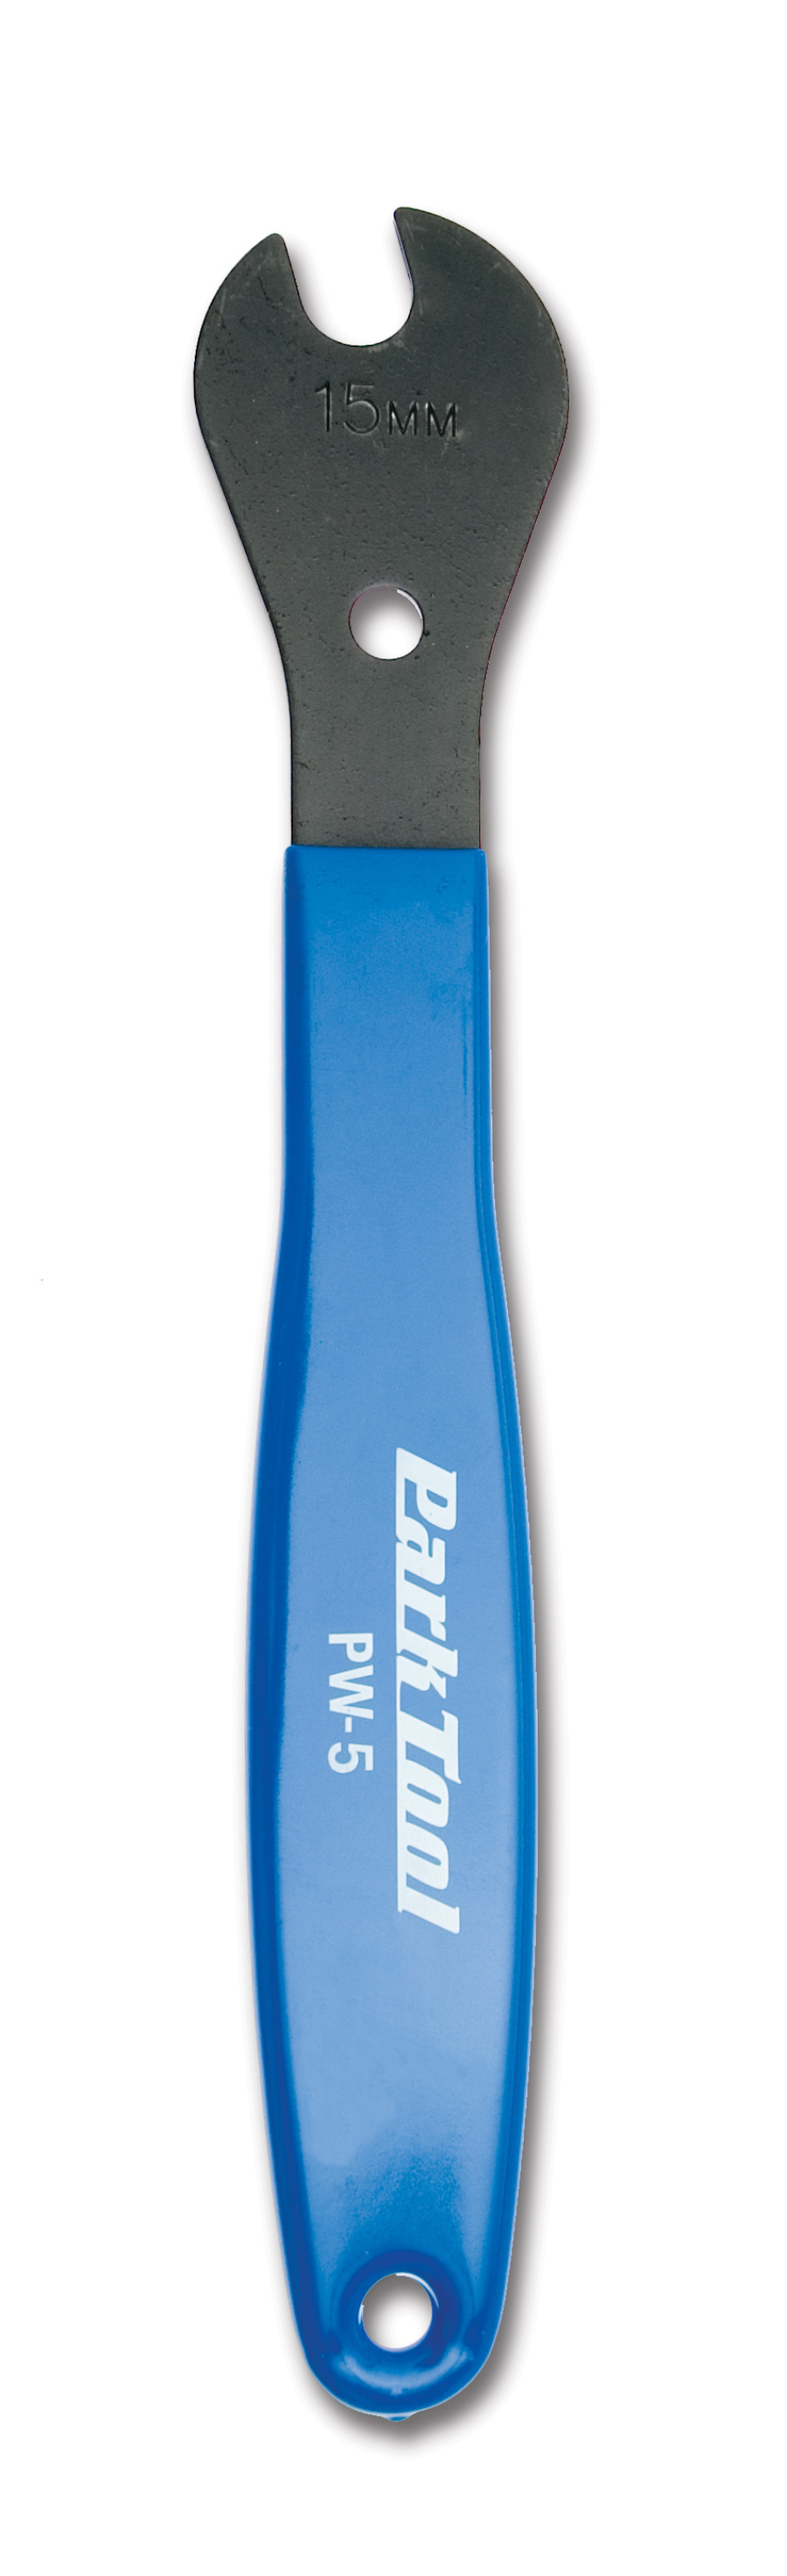 The Park Tool PW-5 Home Mechanic Pedal Wrench, enlarged